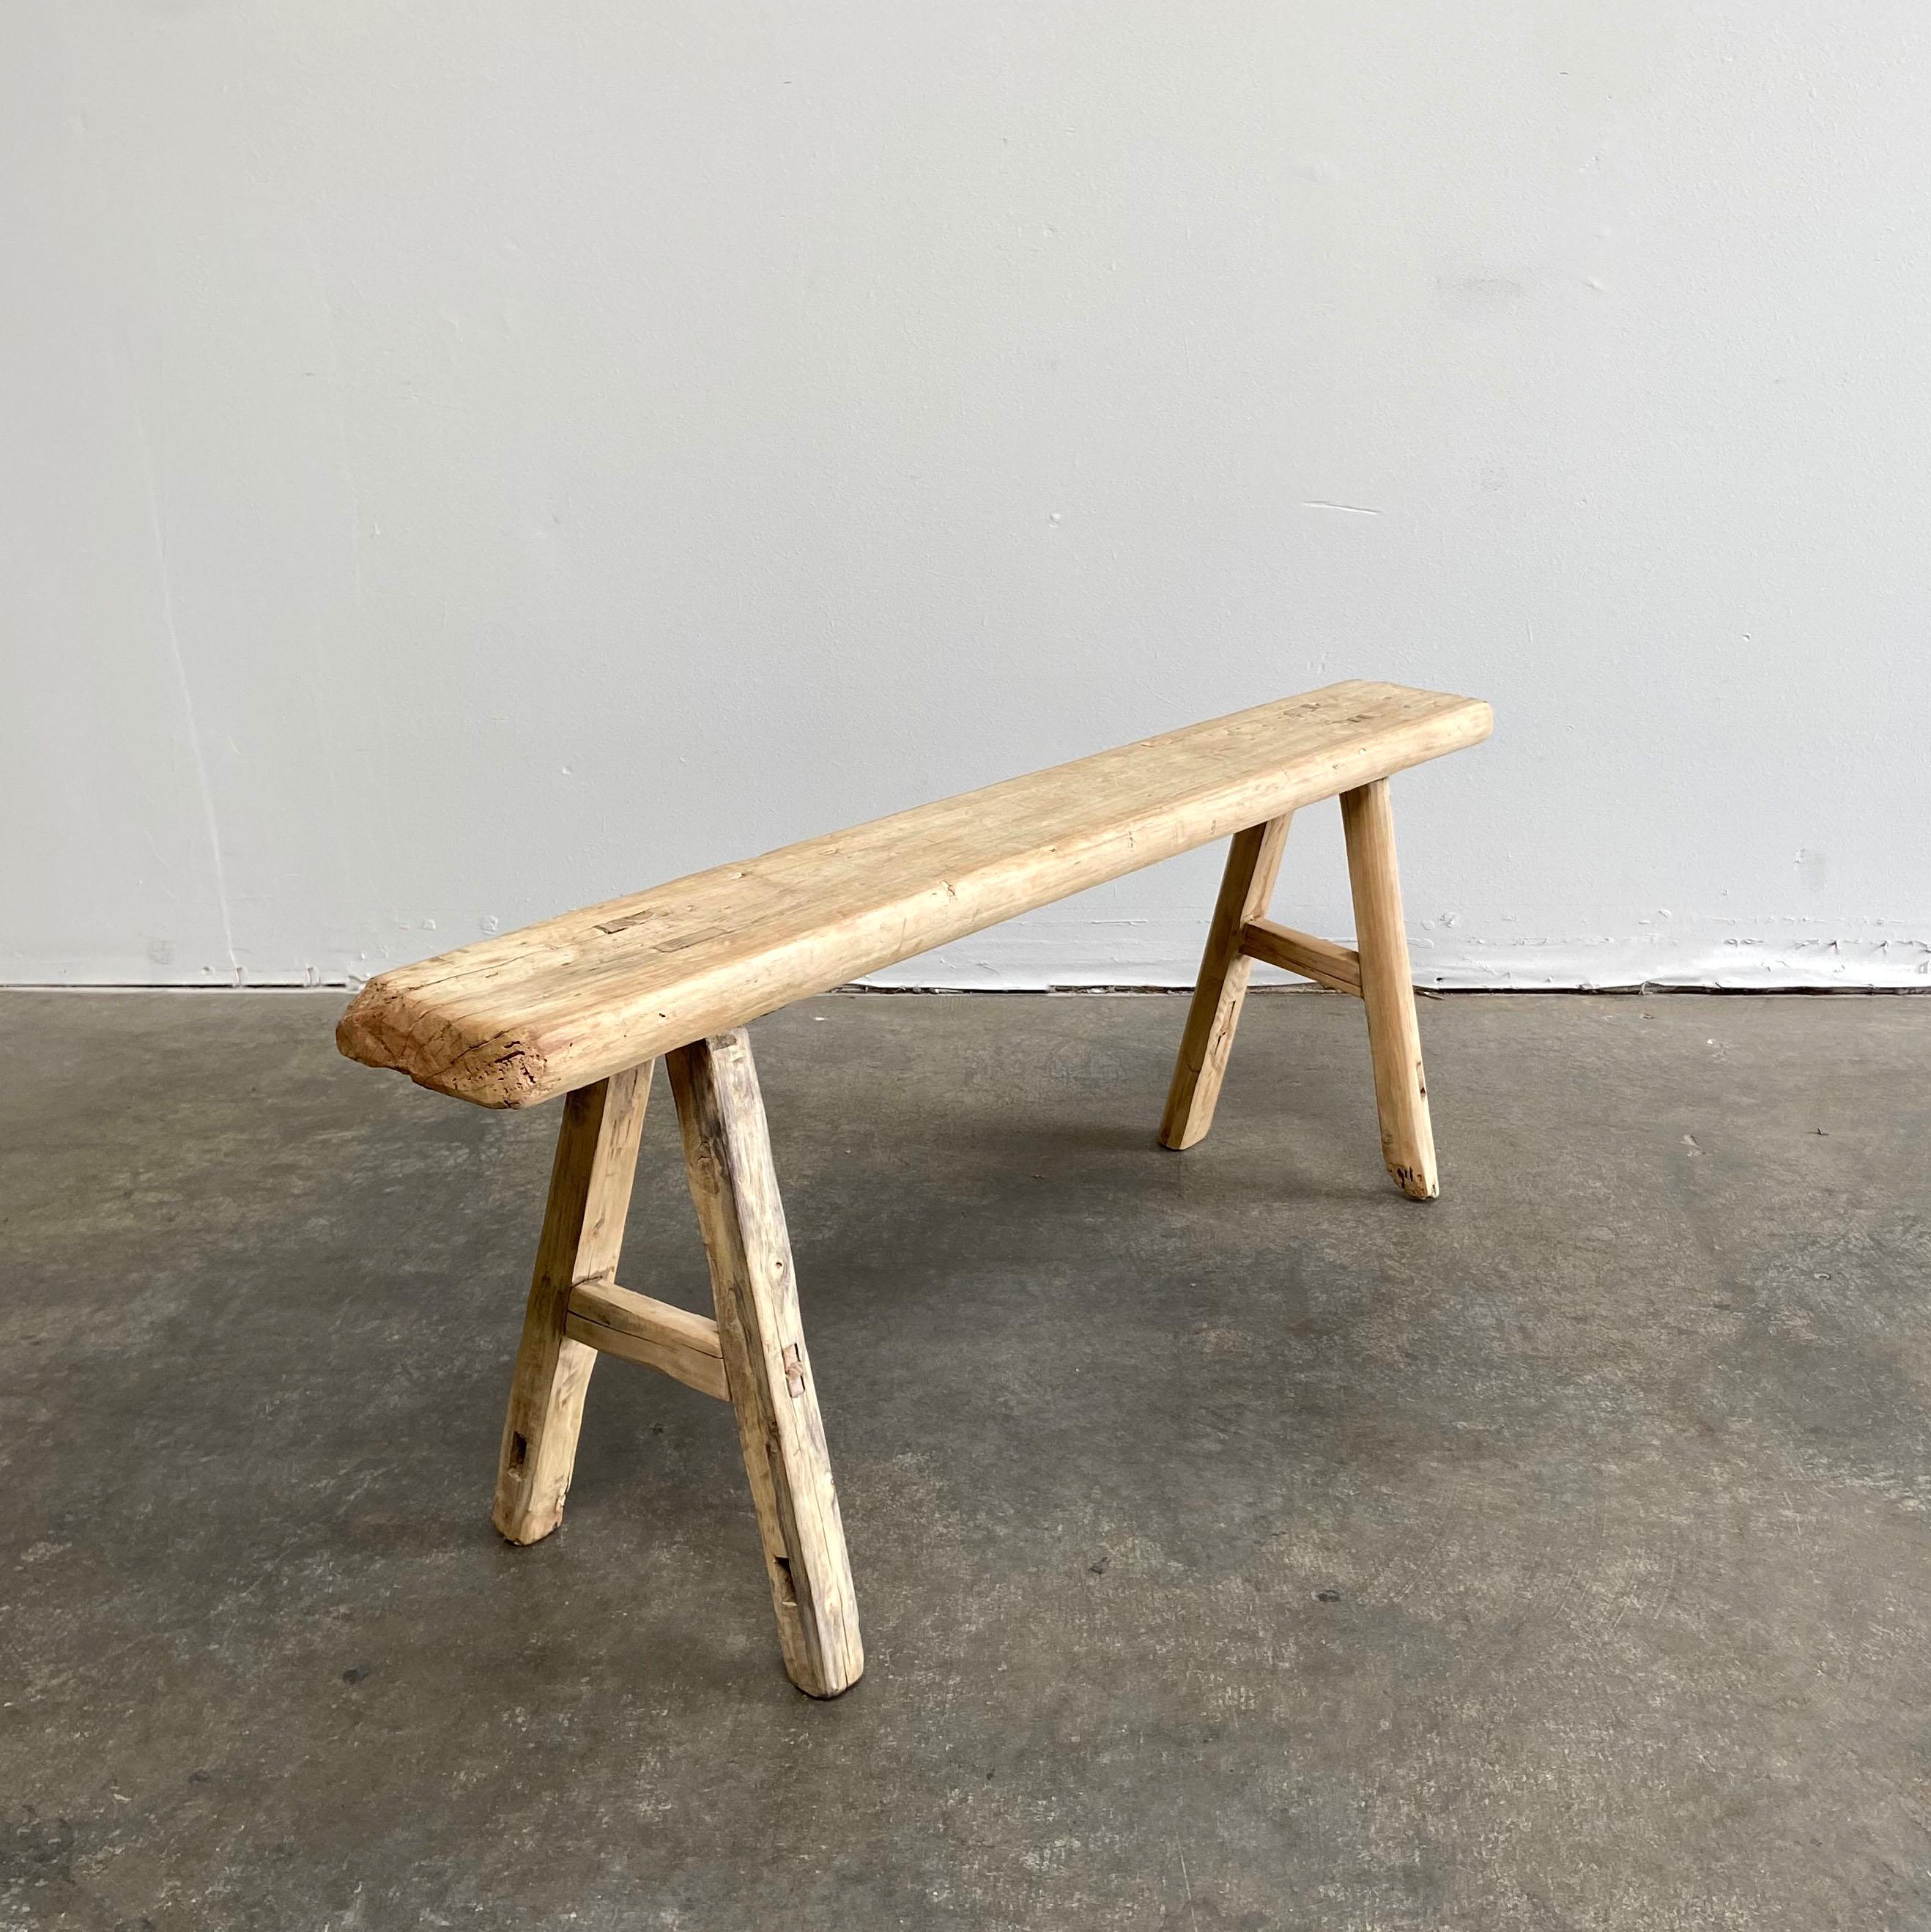 Vintage antique elm wood bench
These are the real vintage antique elm wood benches! Beautiful antique patina, with weathering and age, these are solid and sturdy ready for daily use, use as a table behind a sofa, stool, coffee table, they are great